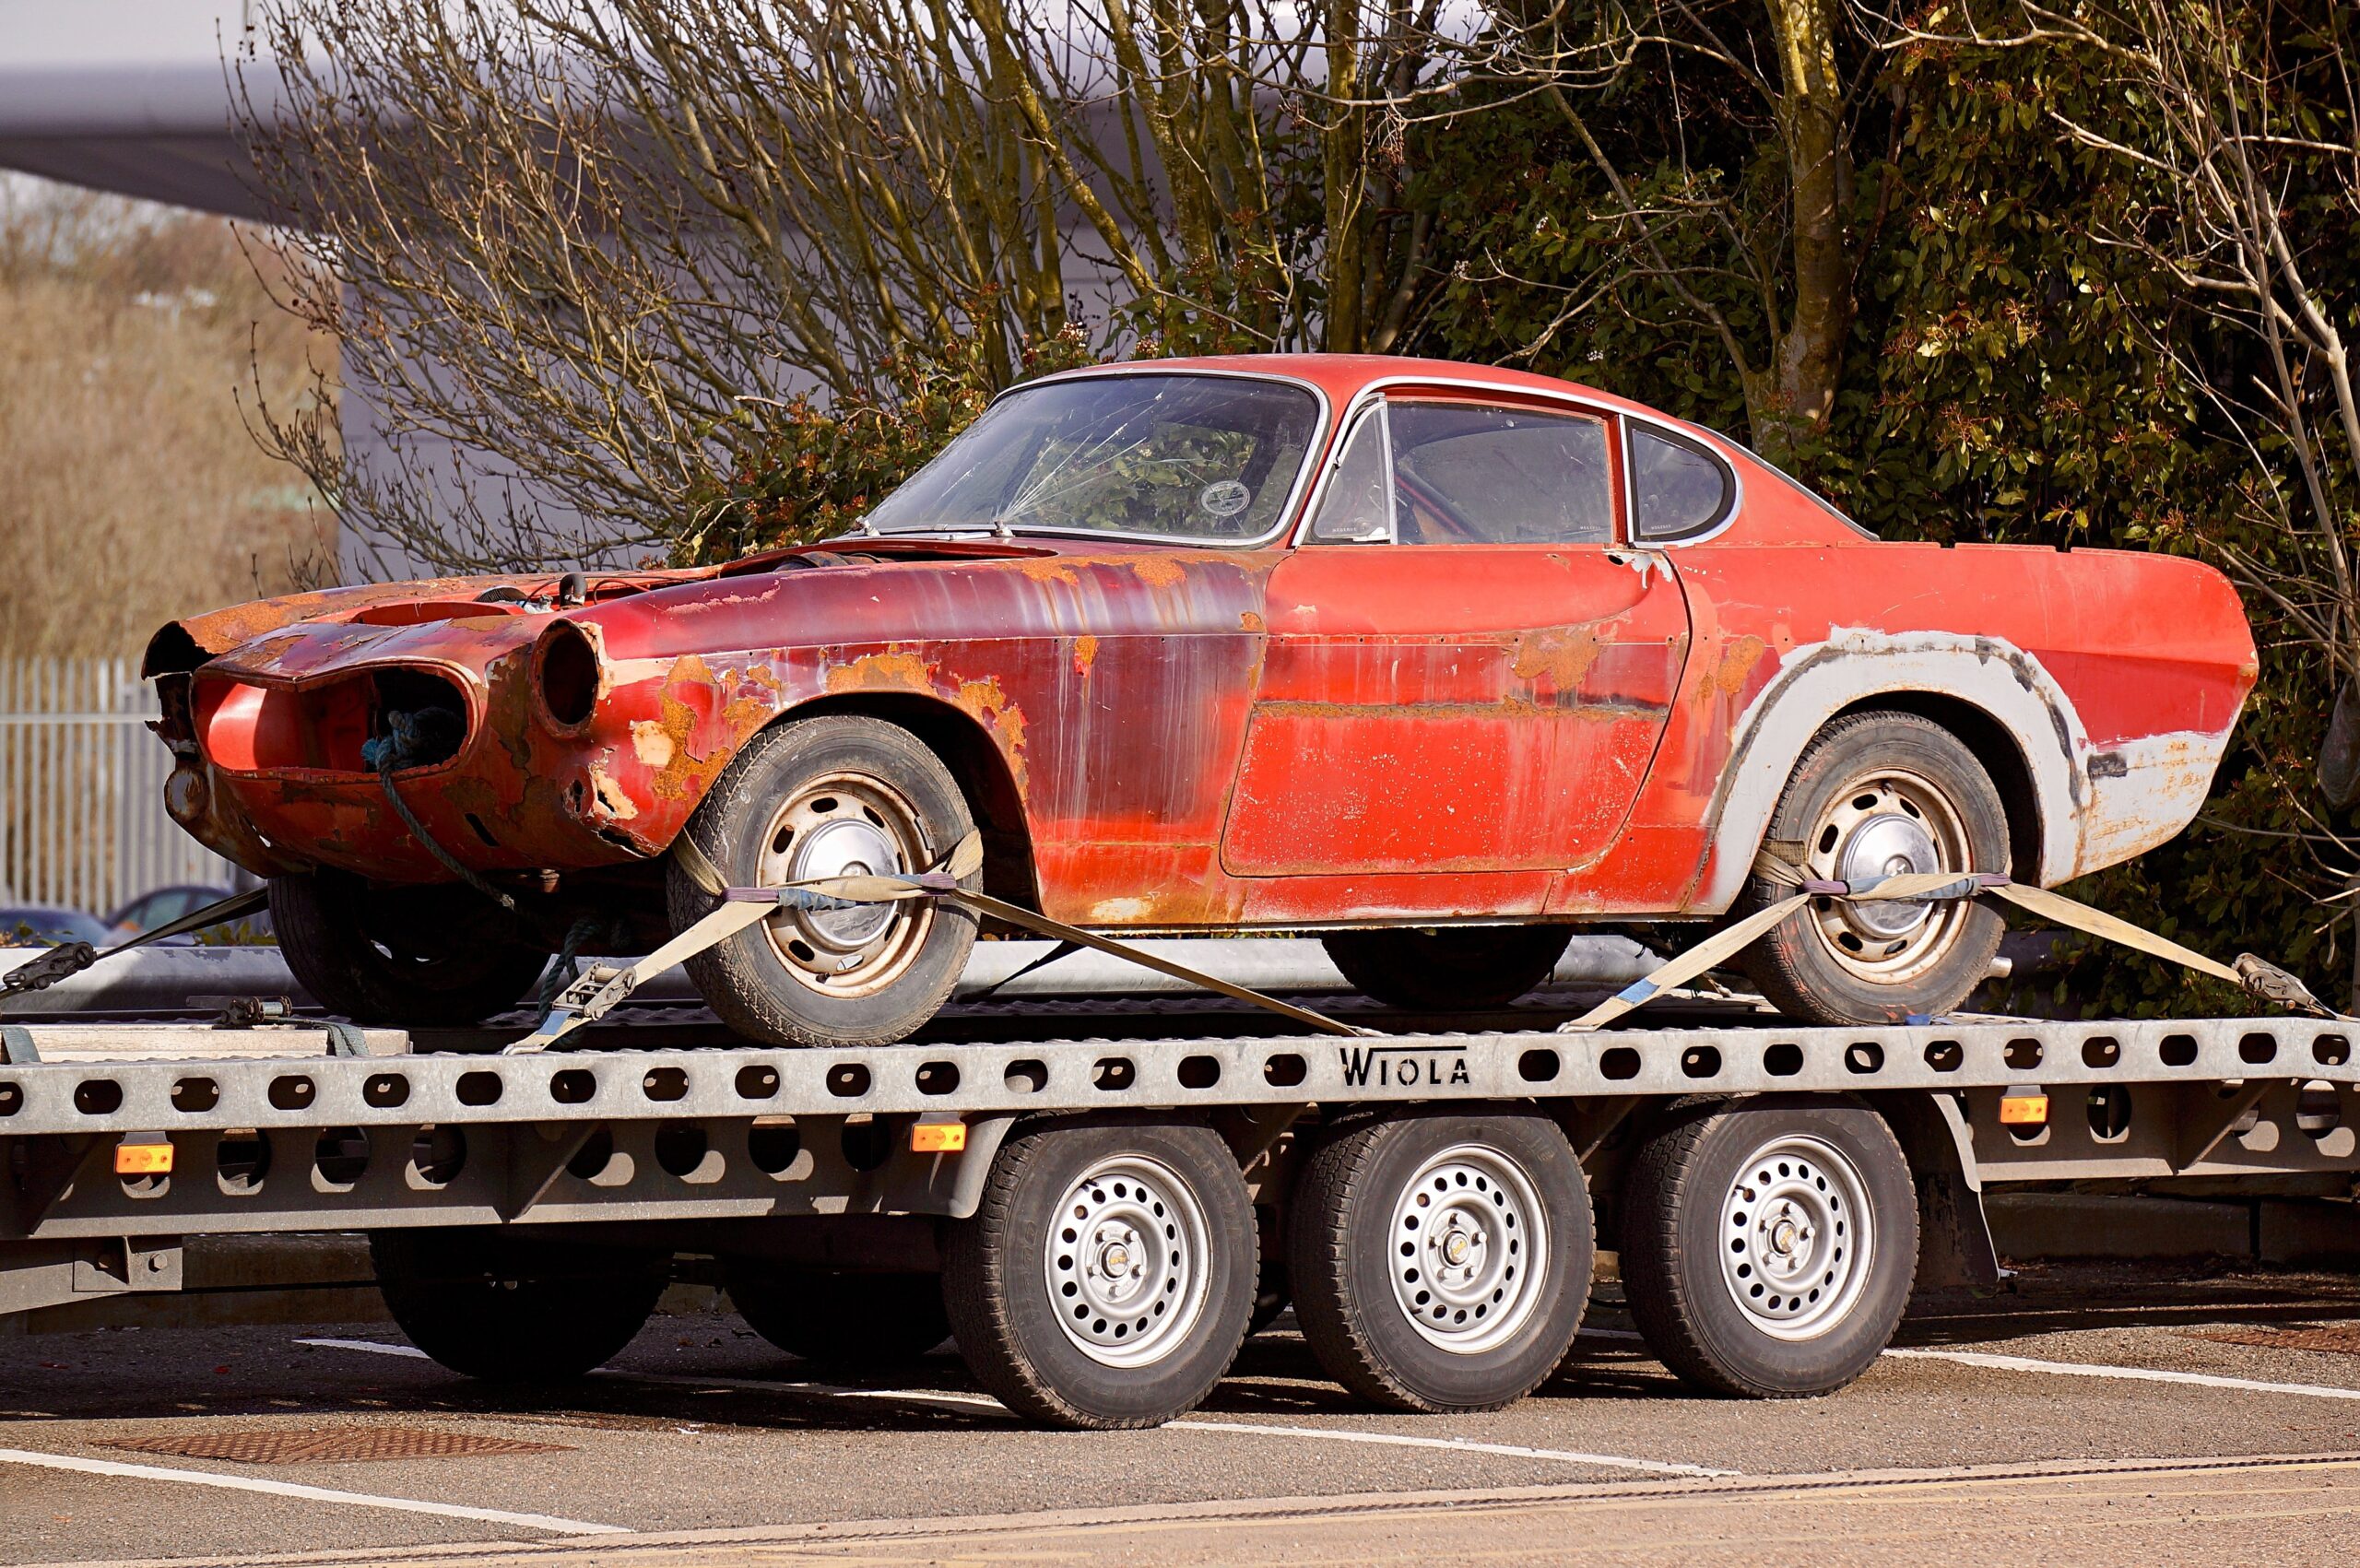 Finding Reliable 247 Vehicle Towing Services in Your Area